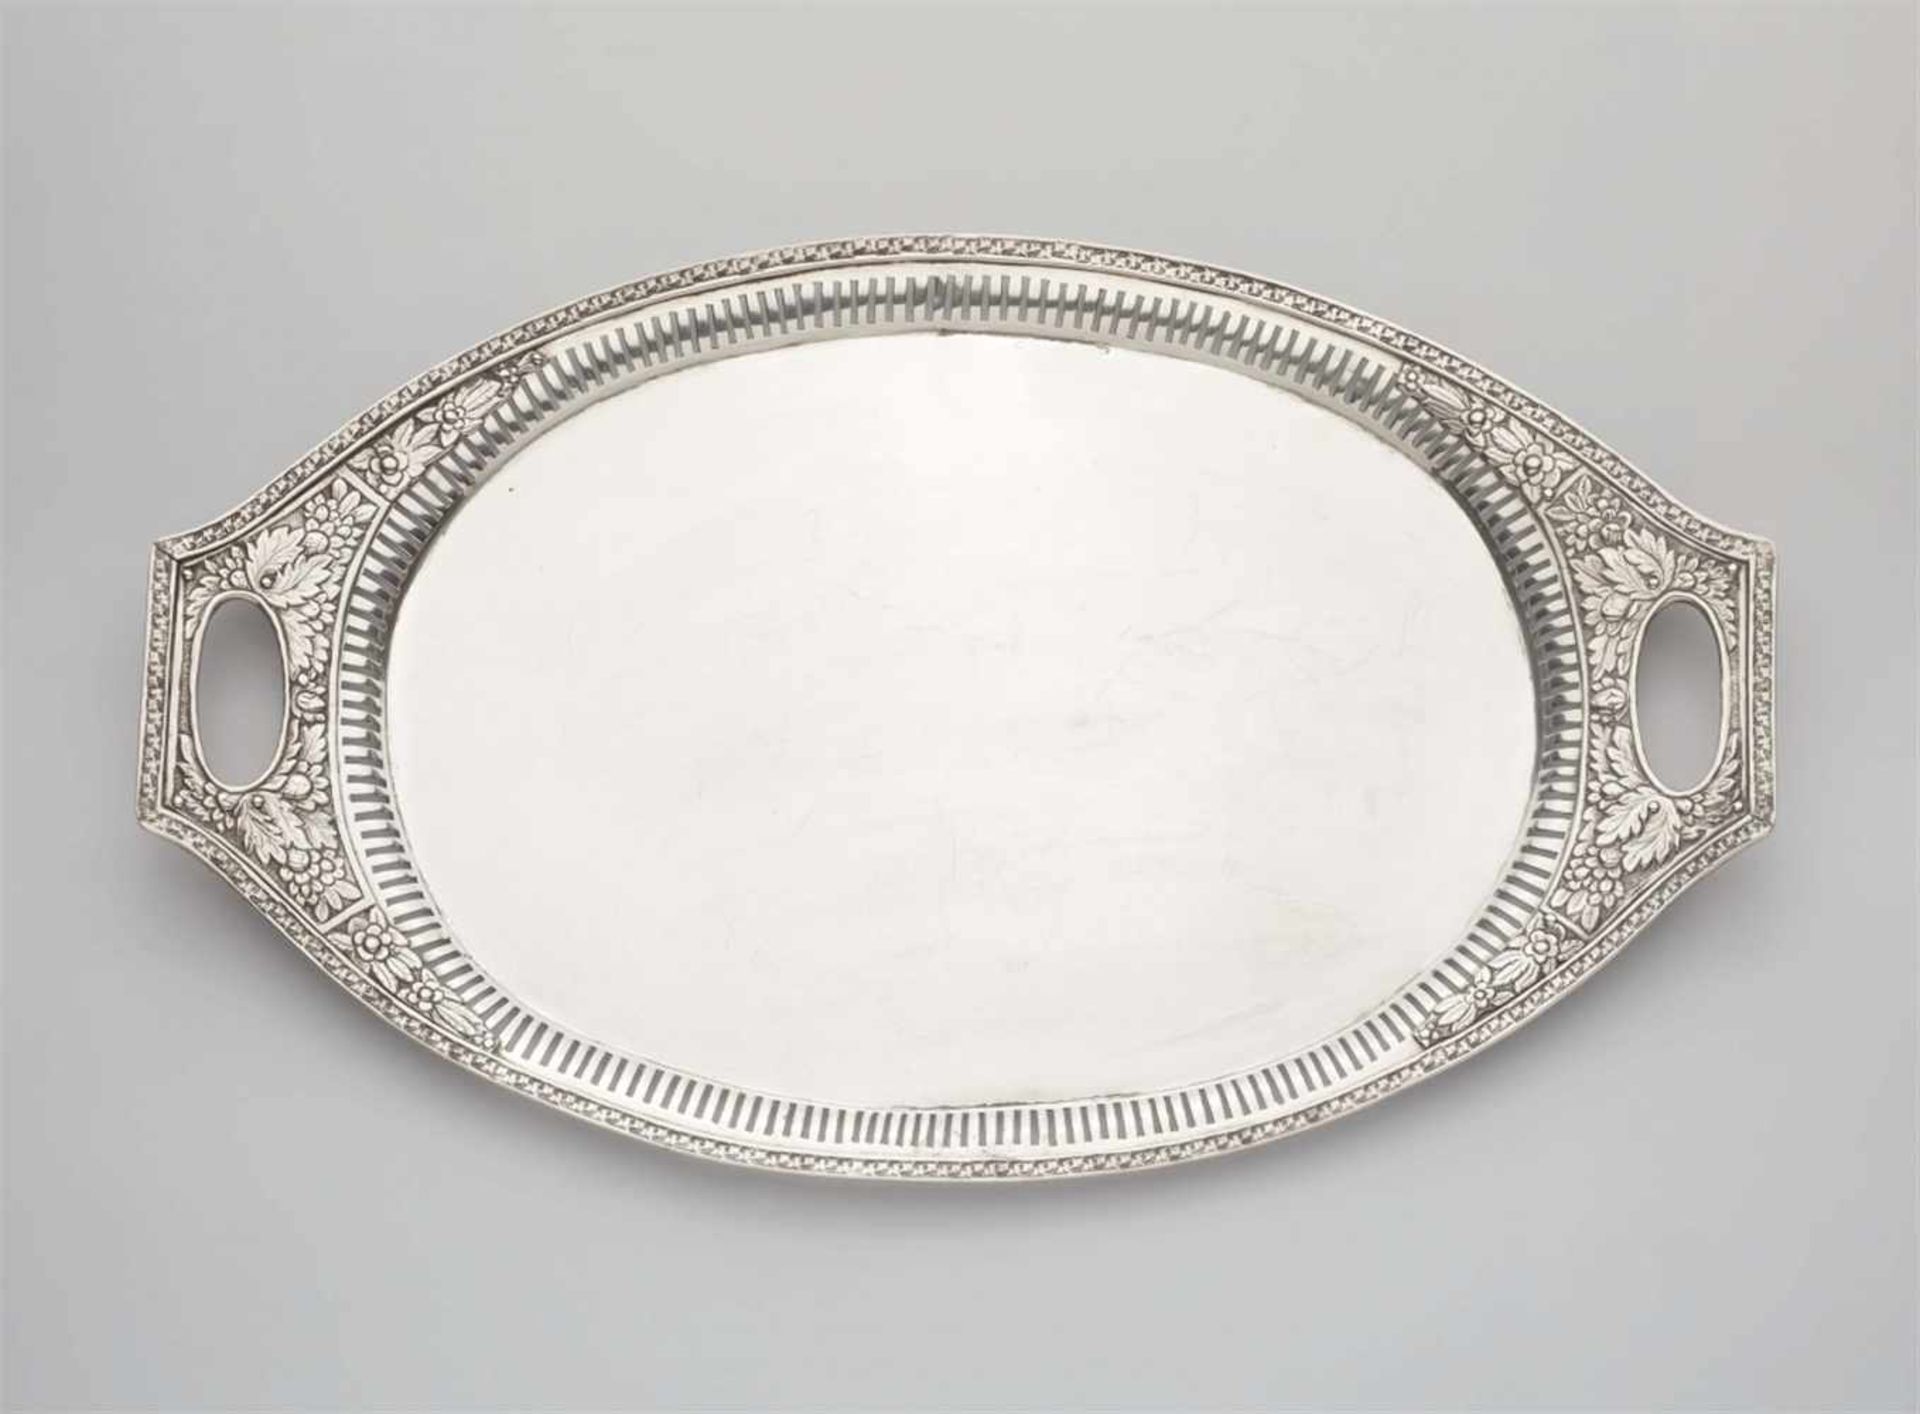 A Neoclassical silver platterOval tray. Pierced rim with acanthus and flowerhead reliefs. L 54; W 33